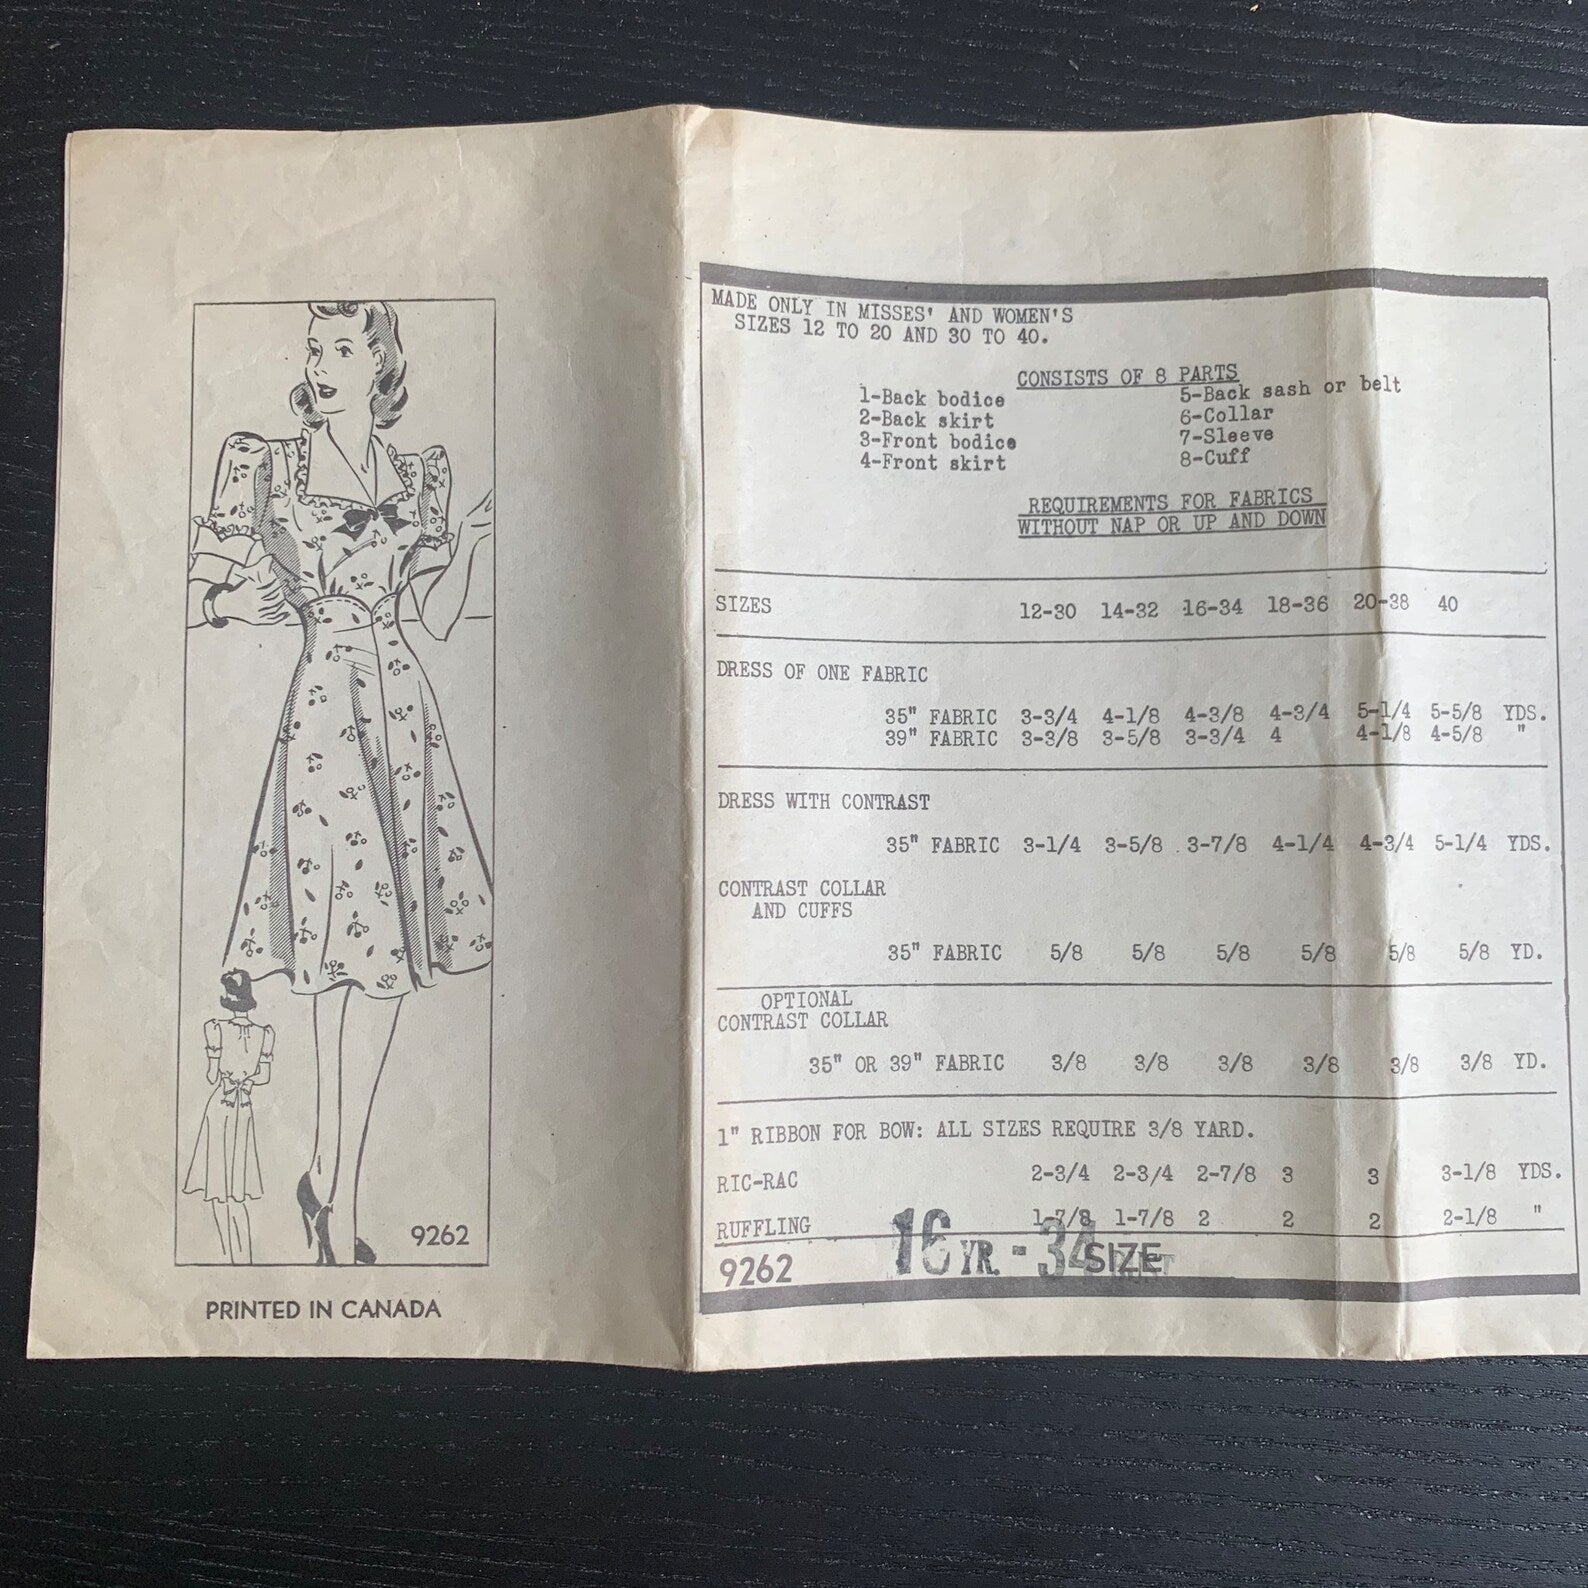 VINTAGE 1940s Marian Martin Mail Order Sewing Pattern 9262, Puff Sleeve Flared Skirt Dress with Collar, Size 16, Bust 34" Waist 28" Hip 37"